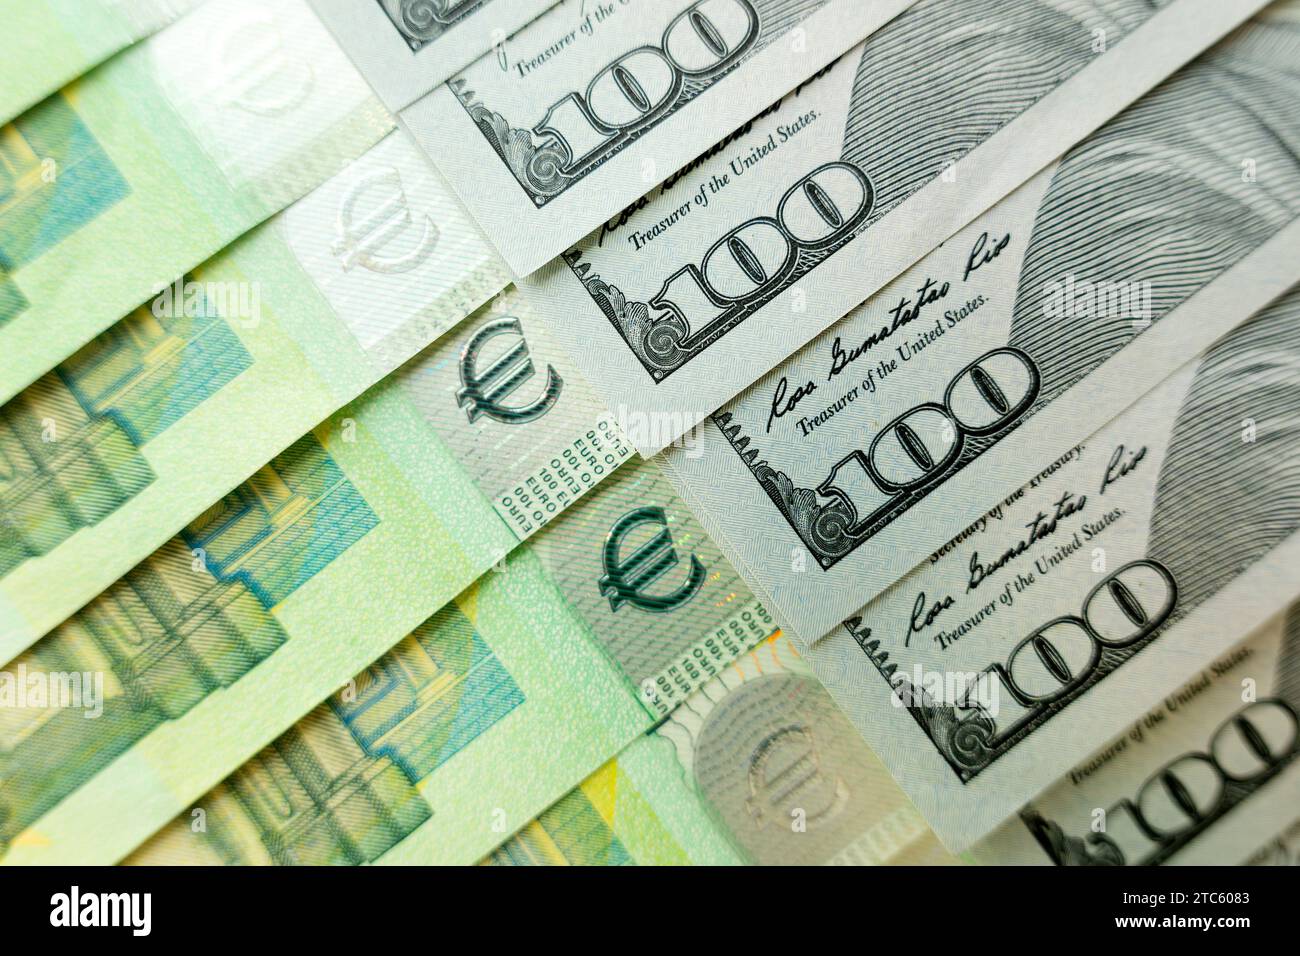 Close-up image of hundred dollar and hundred euro bills. Banknotes of 100 US dollars and 100 euros. Currency exchange rate. Stock Photo